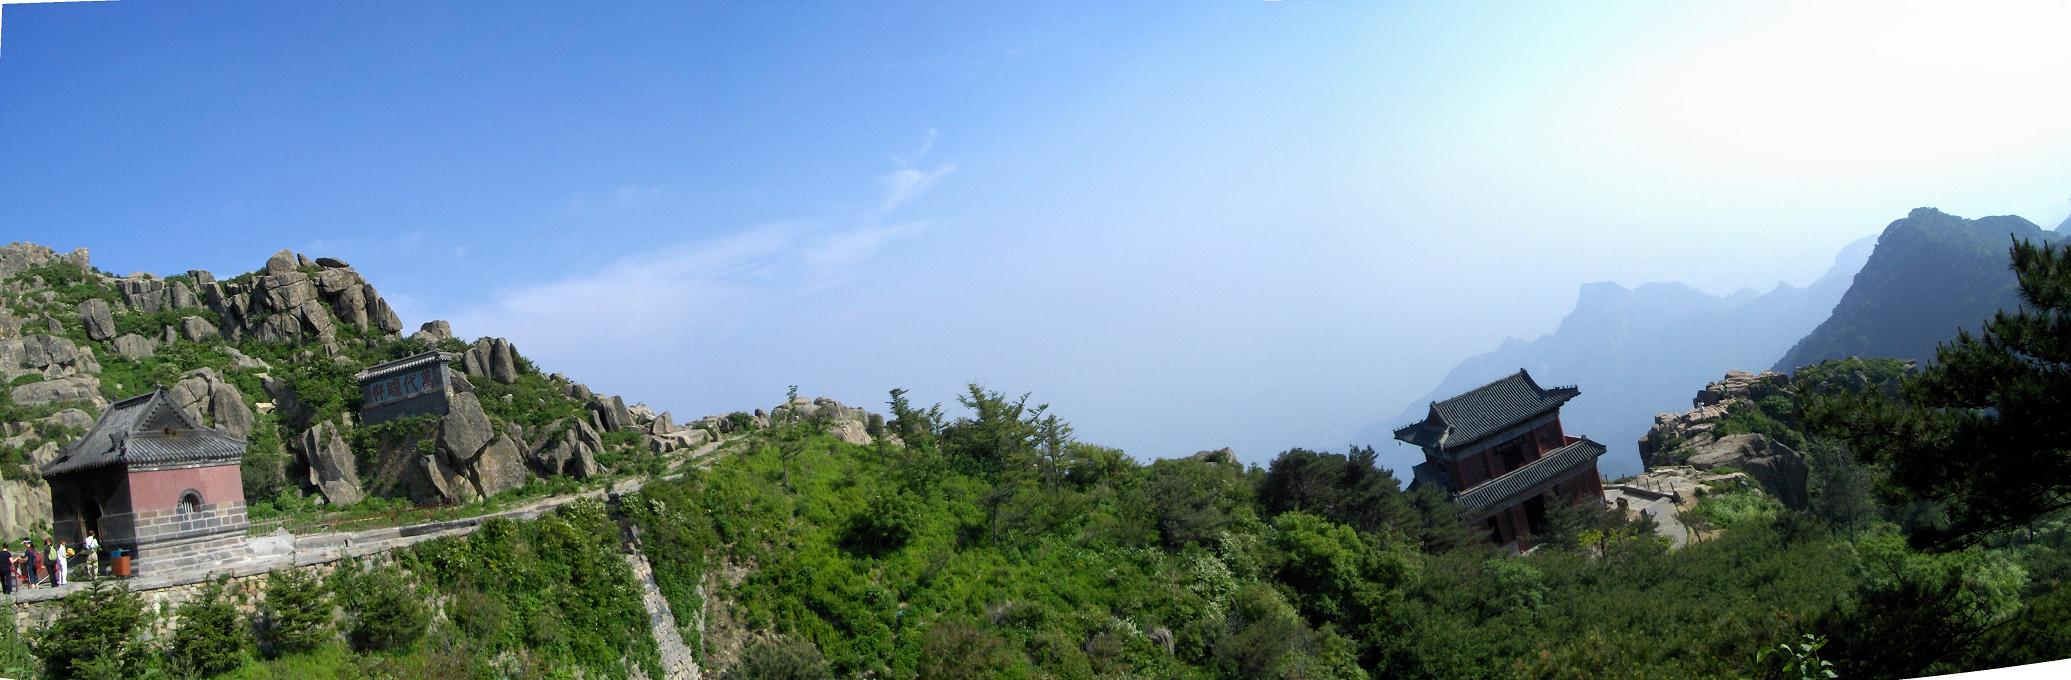 A shrine (left) and a Confucius Temple on the way to the peak